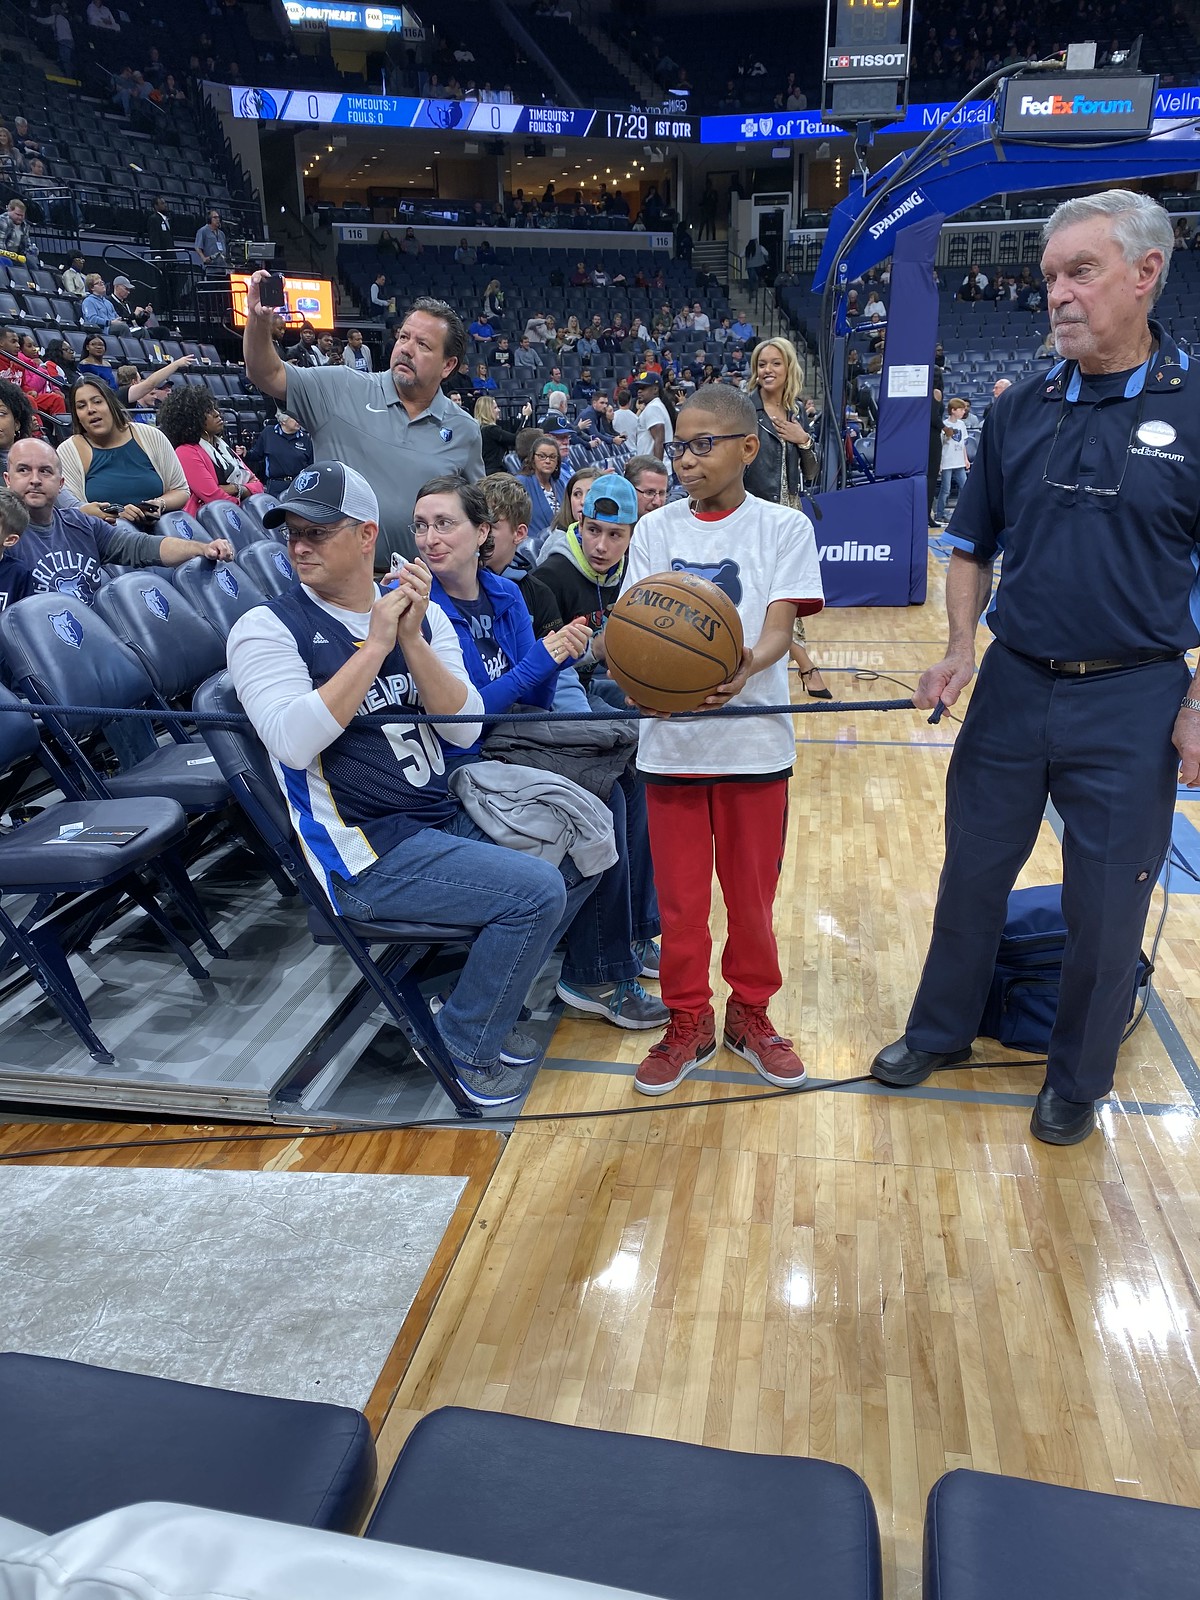 2019_T4T_Memphis Grizzlies Hoops for Troops 6